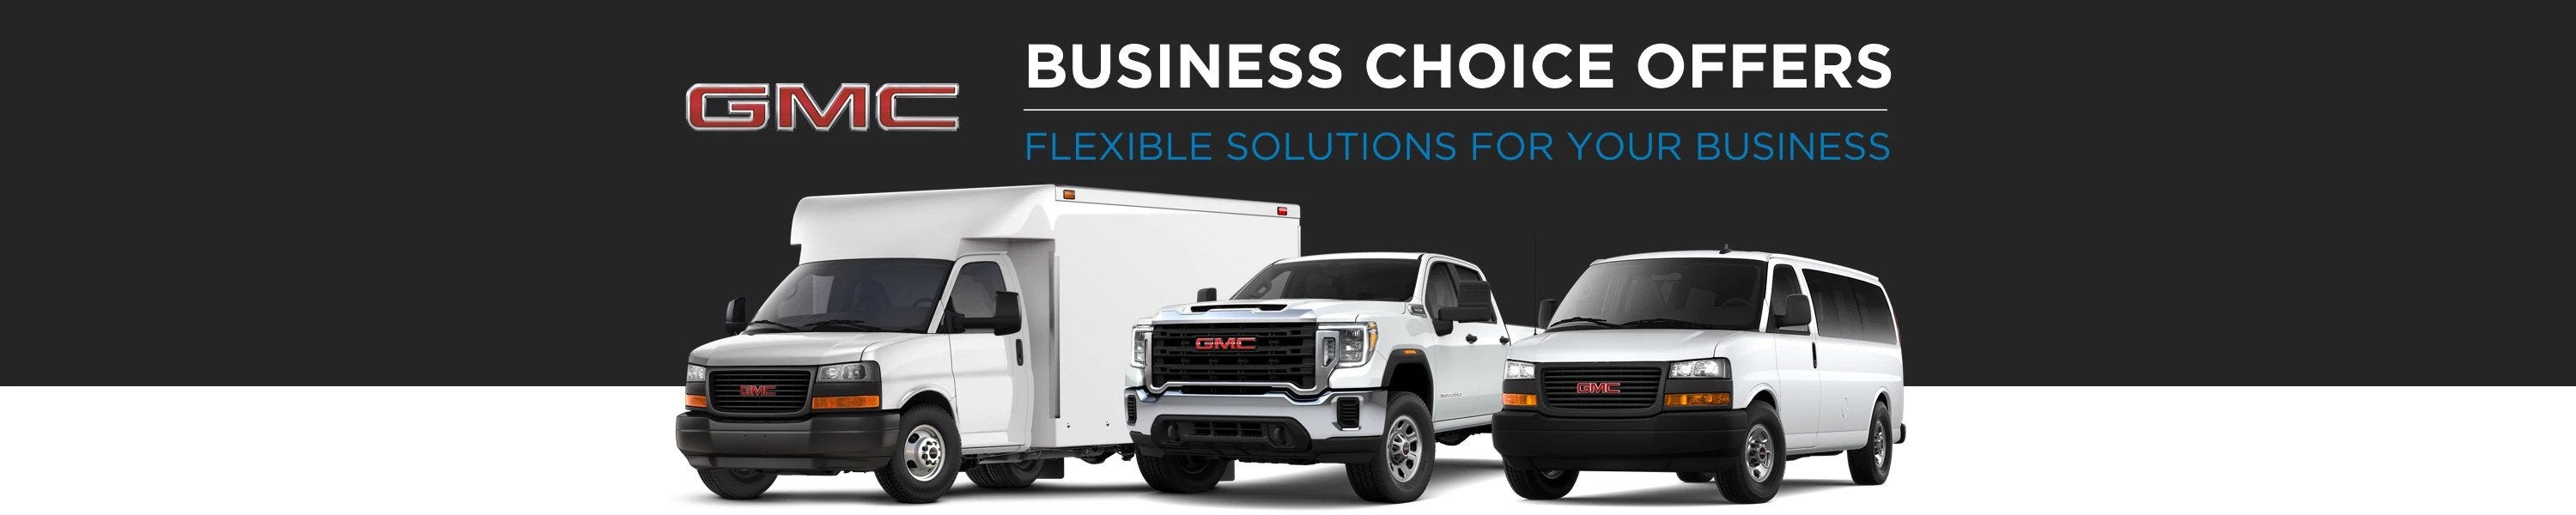 GMC Business Choice Offers - Flexible Solutions for your Business - Dimmitt Cadillac of Clearwater in Clearwater FL